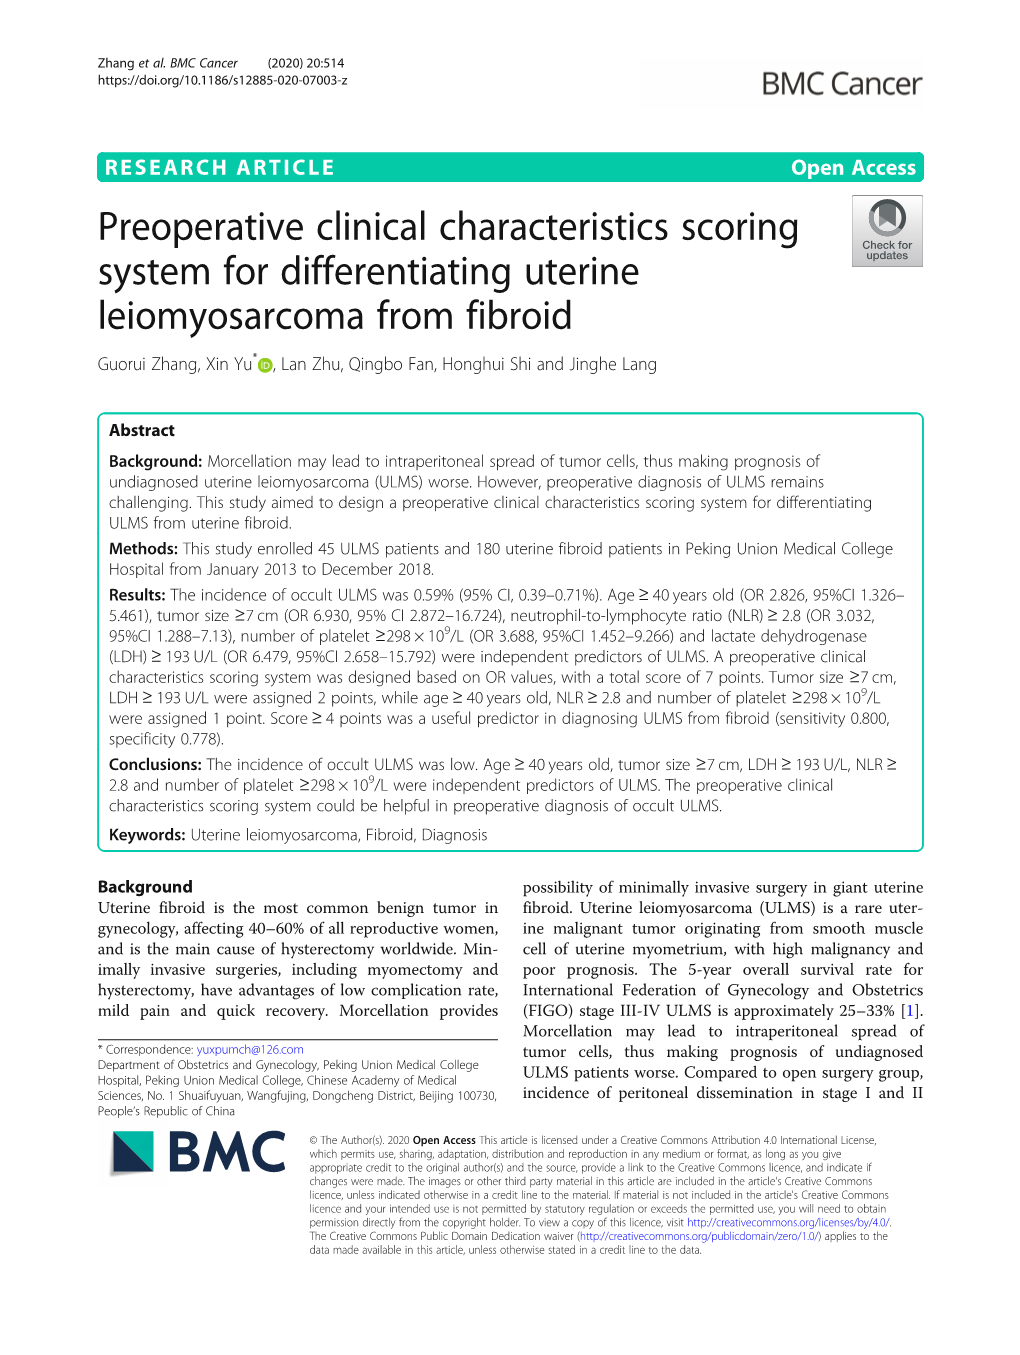 Preoperative Clinical Characteristics Scoring System for Differentiating Uterine Leiomyosarcoma from Fibroid